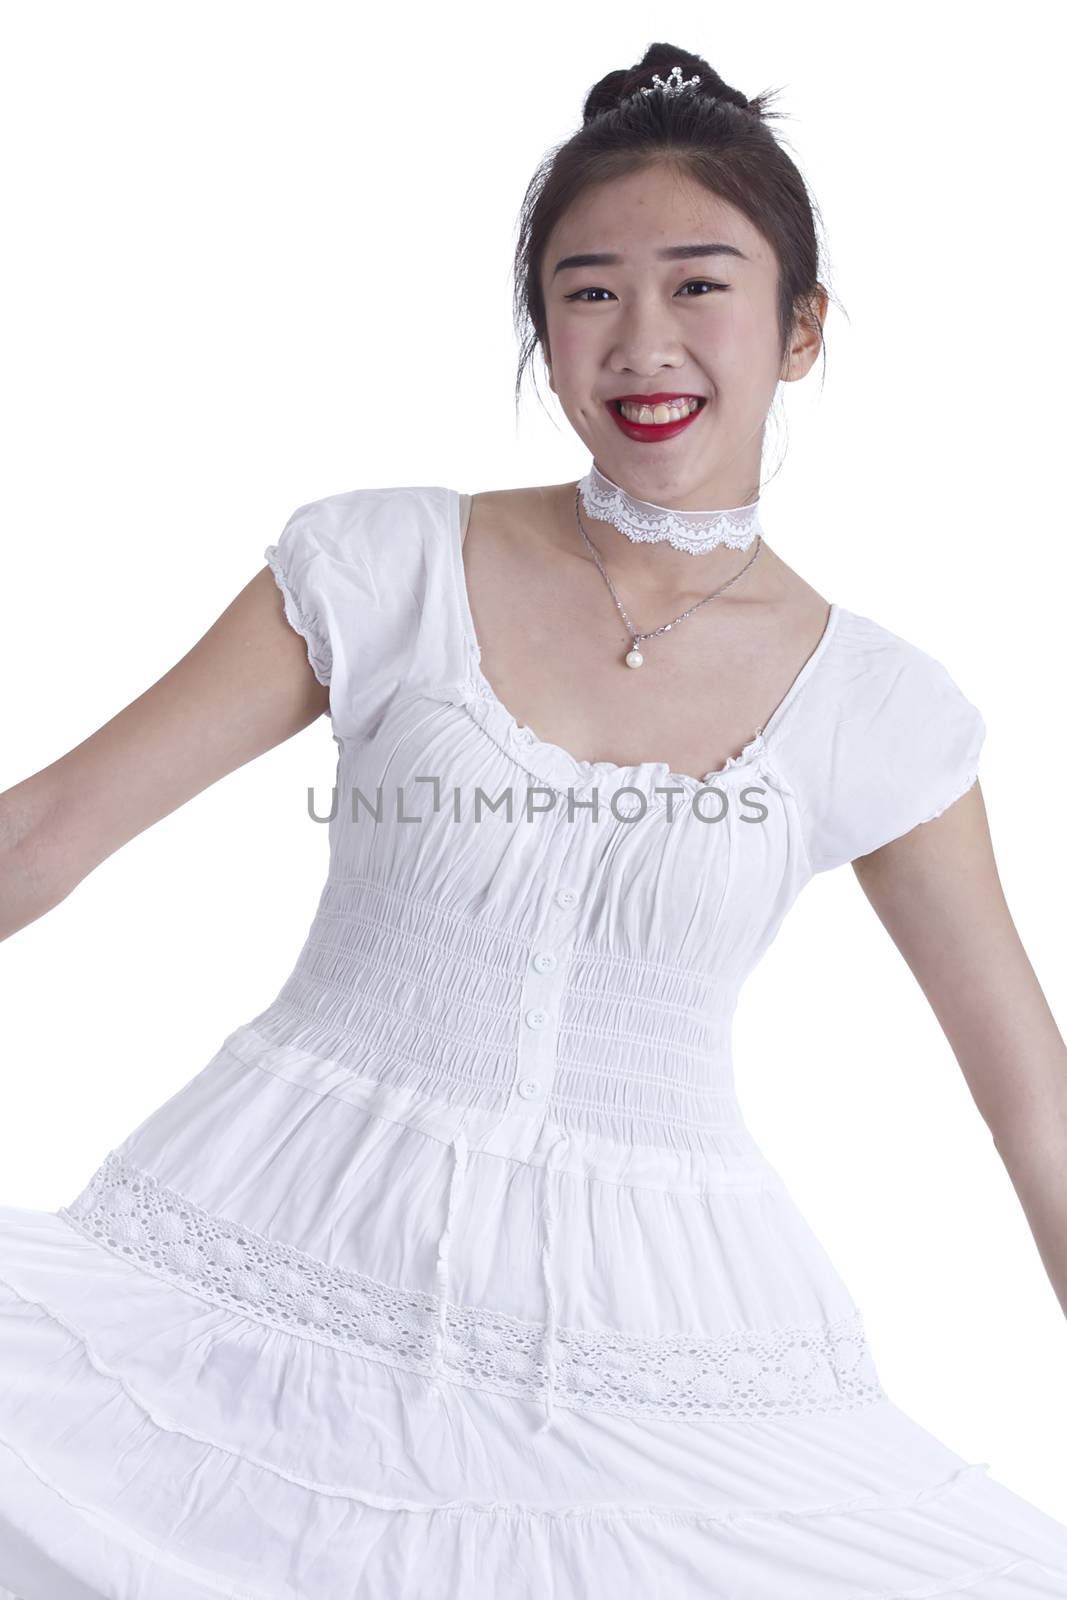 Asian girl close up portrait on a white background